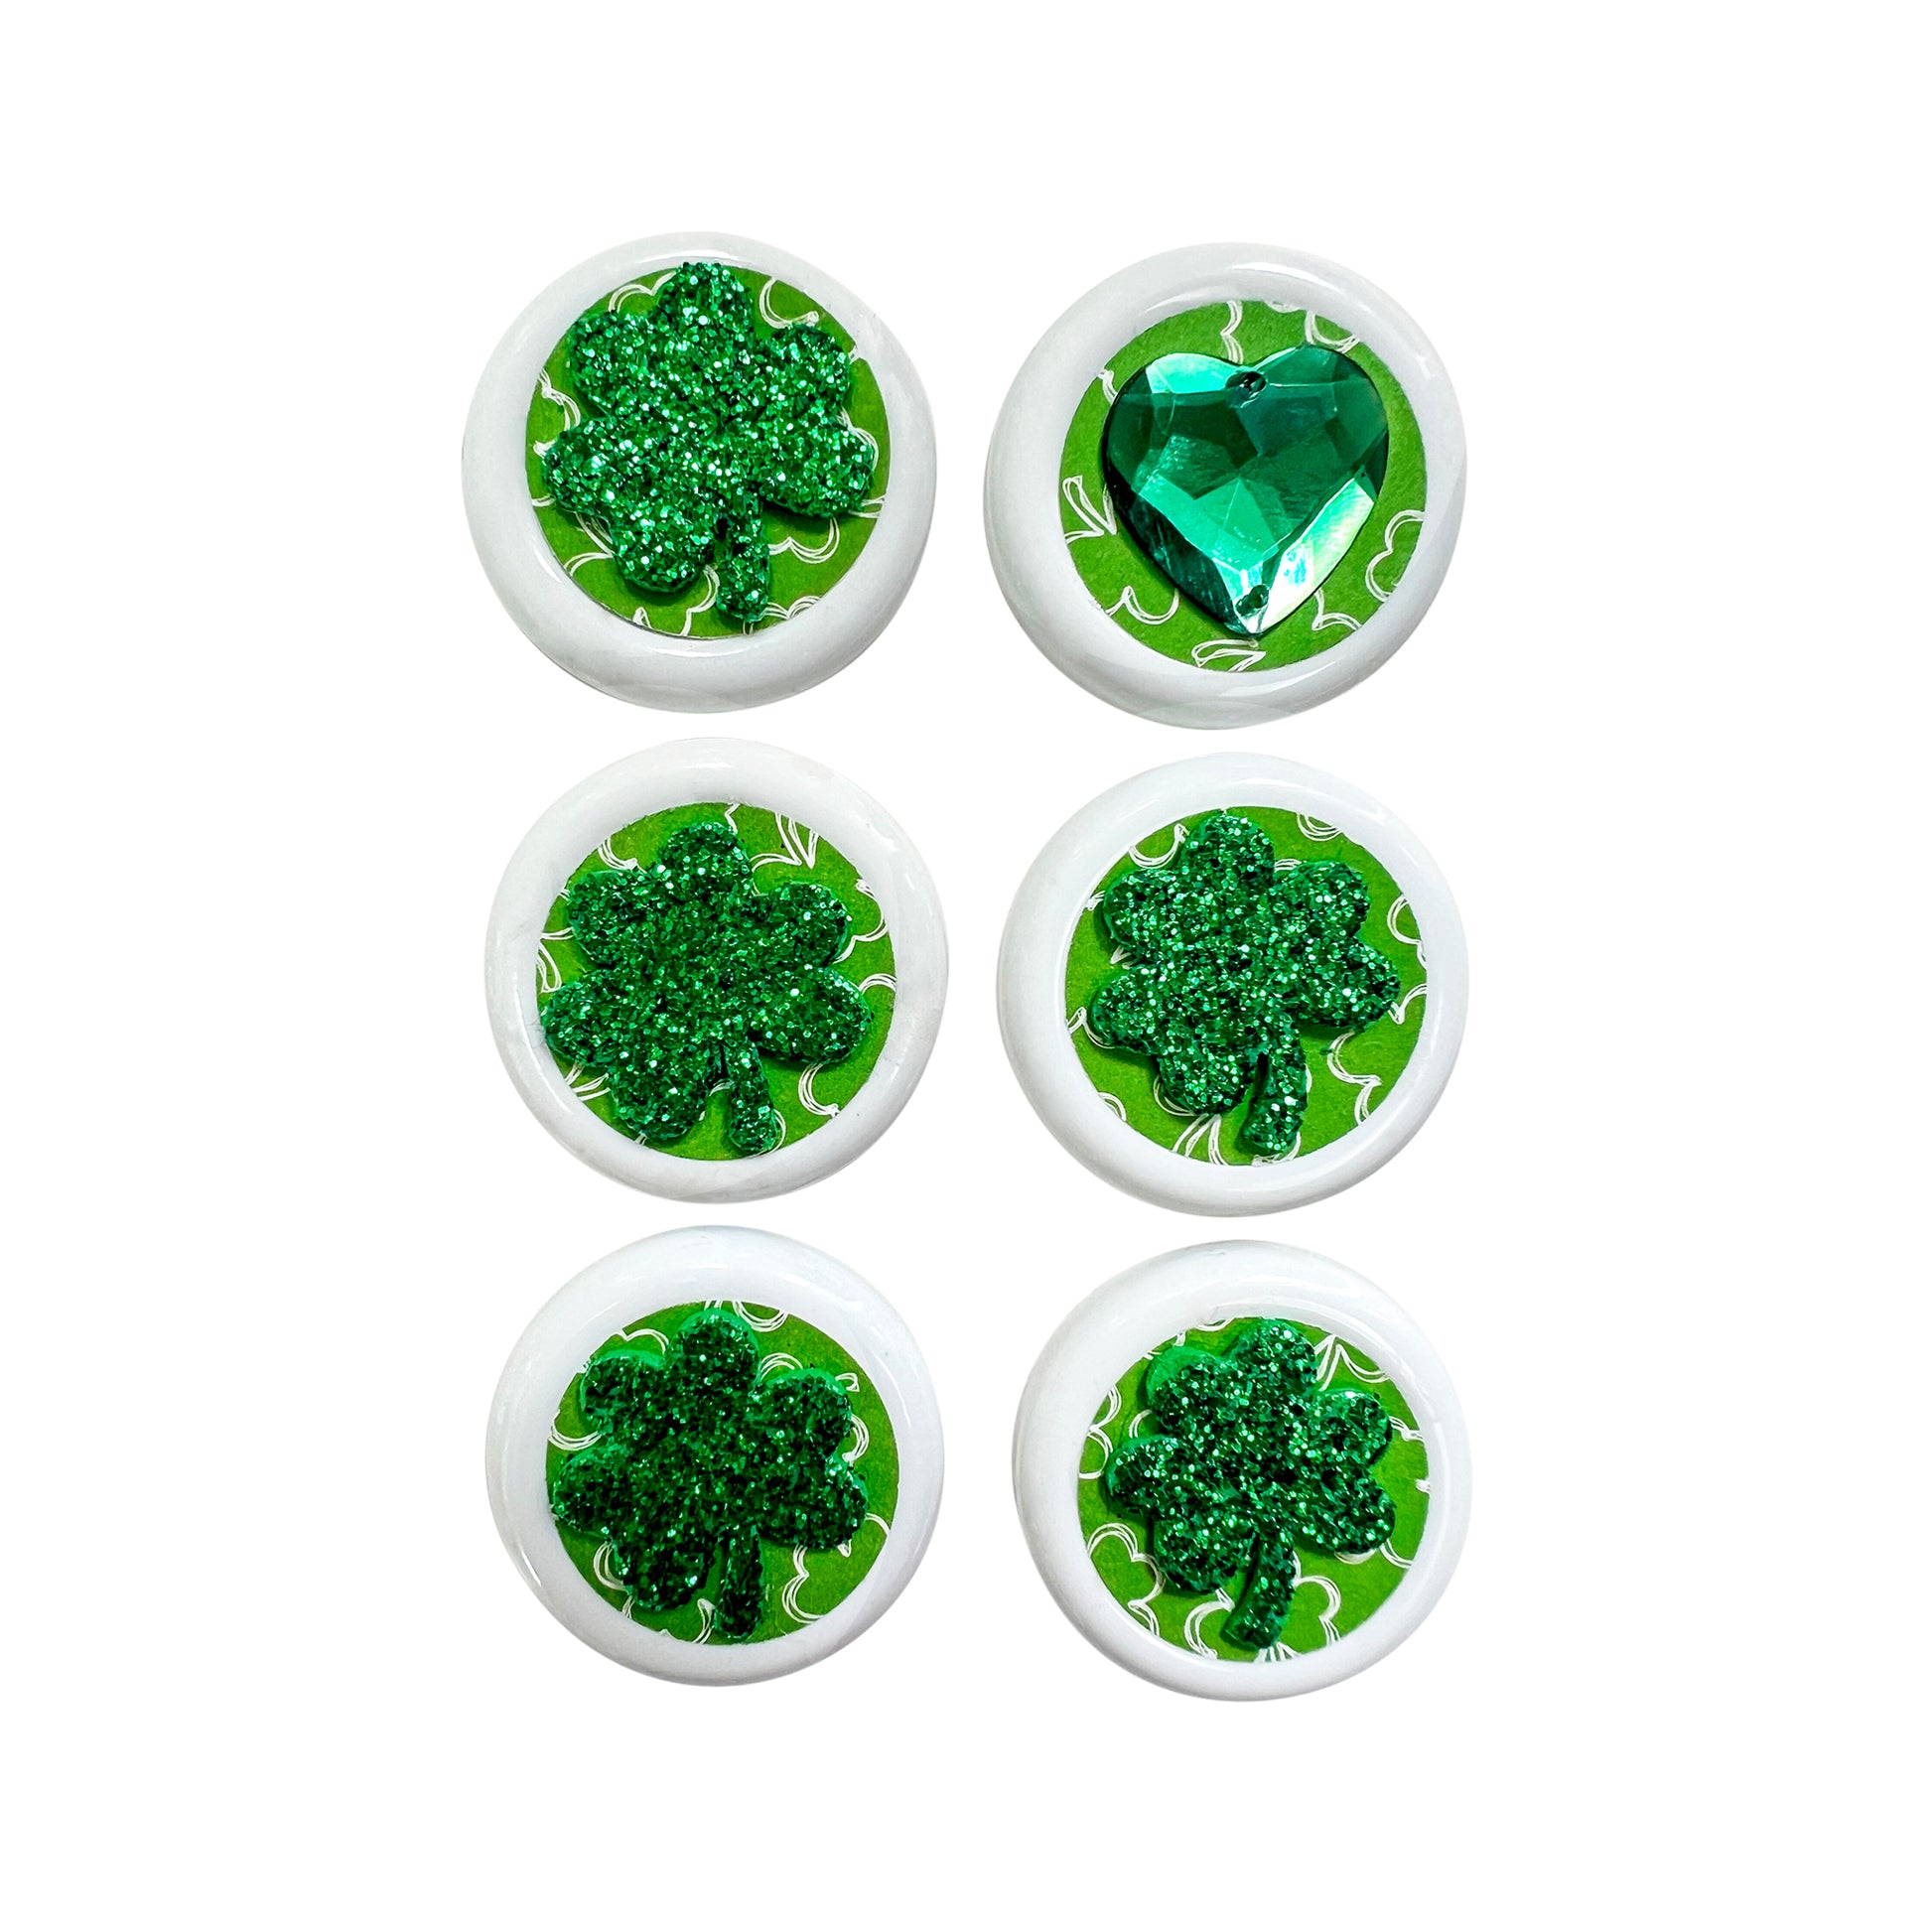 Glass Wrappings' set of 6 white button embellishments, 5 topped with green glitter shamrocks, and 1 with a green gem heart.